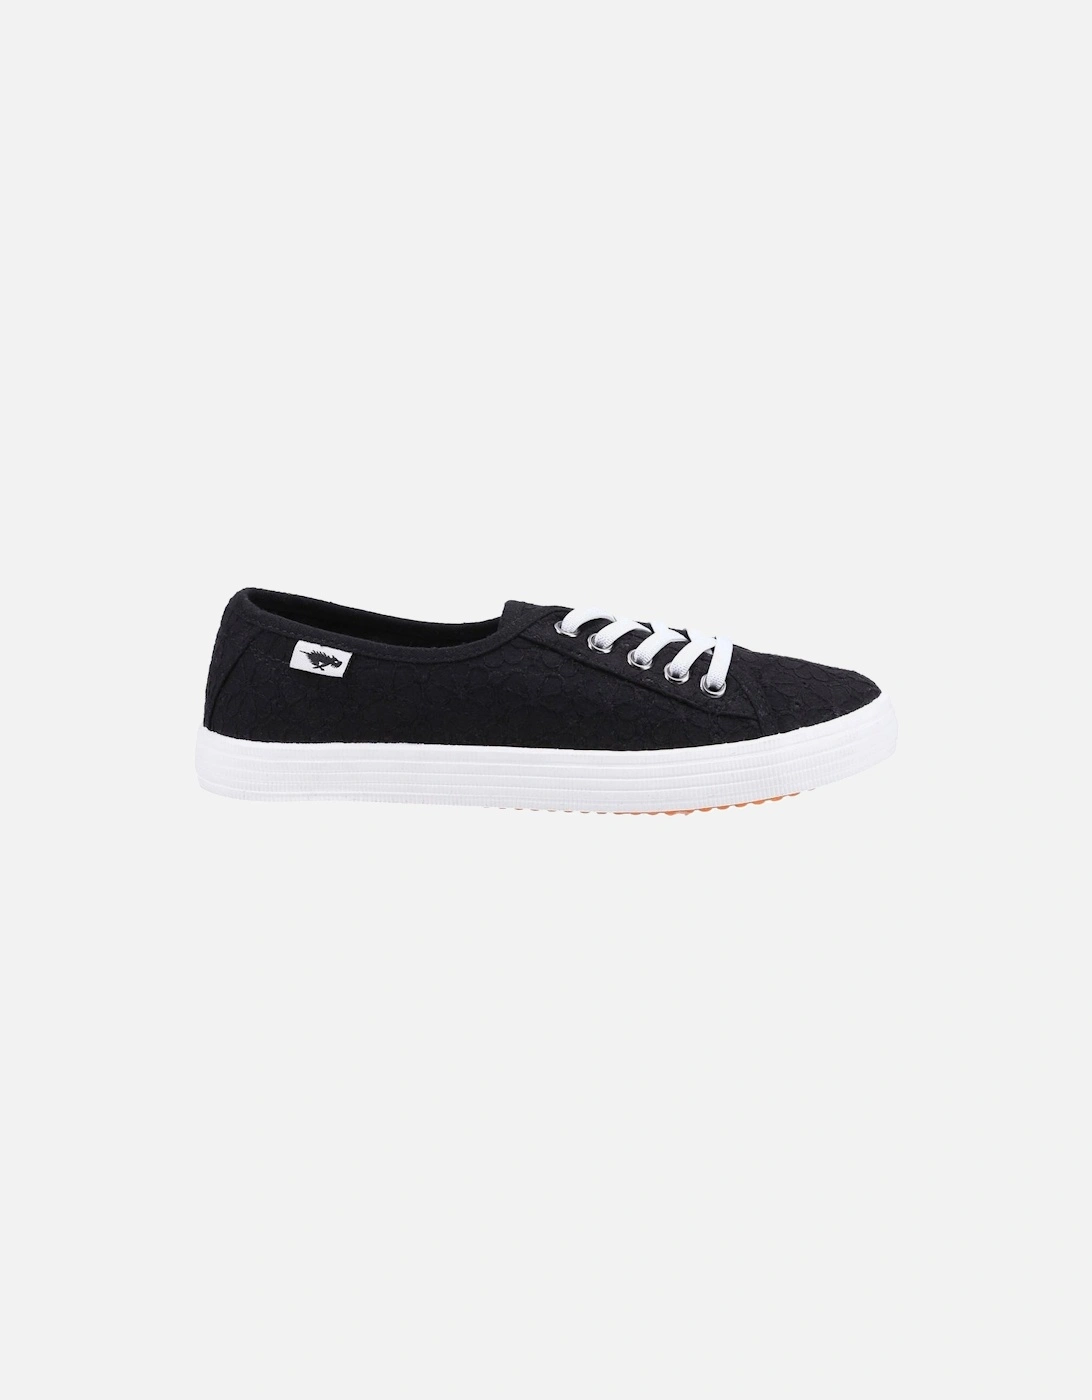 Chow Chow Elsie Eyelet Casual Slip On